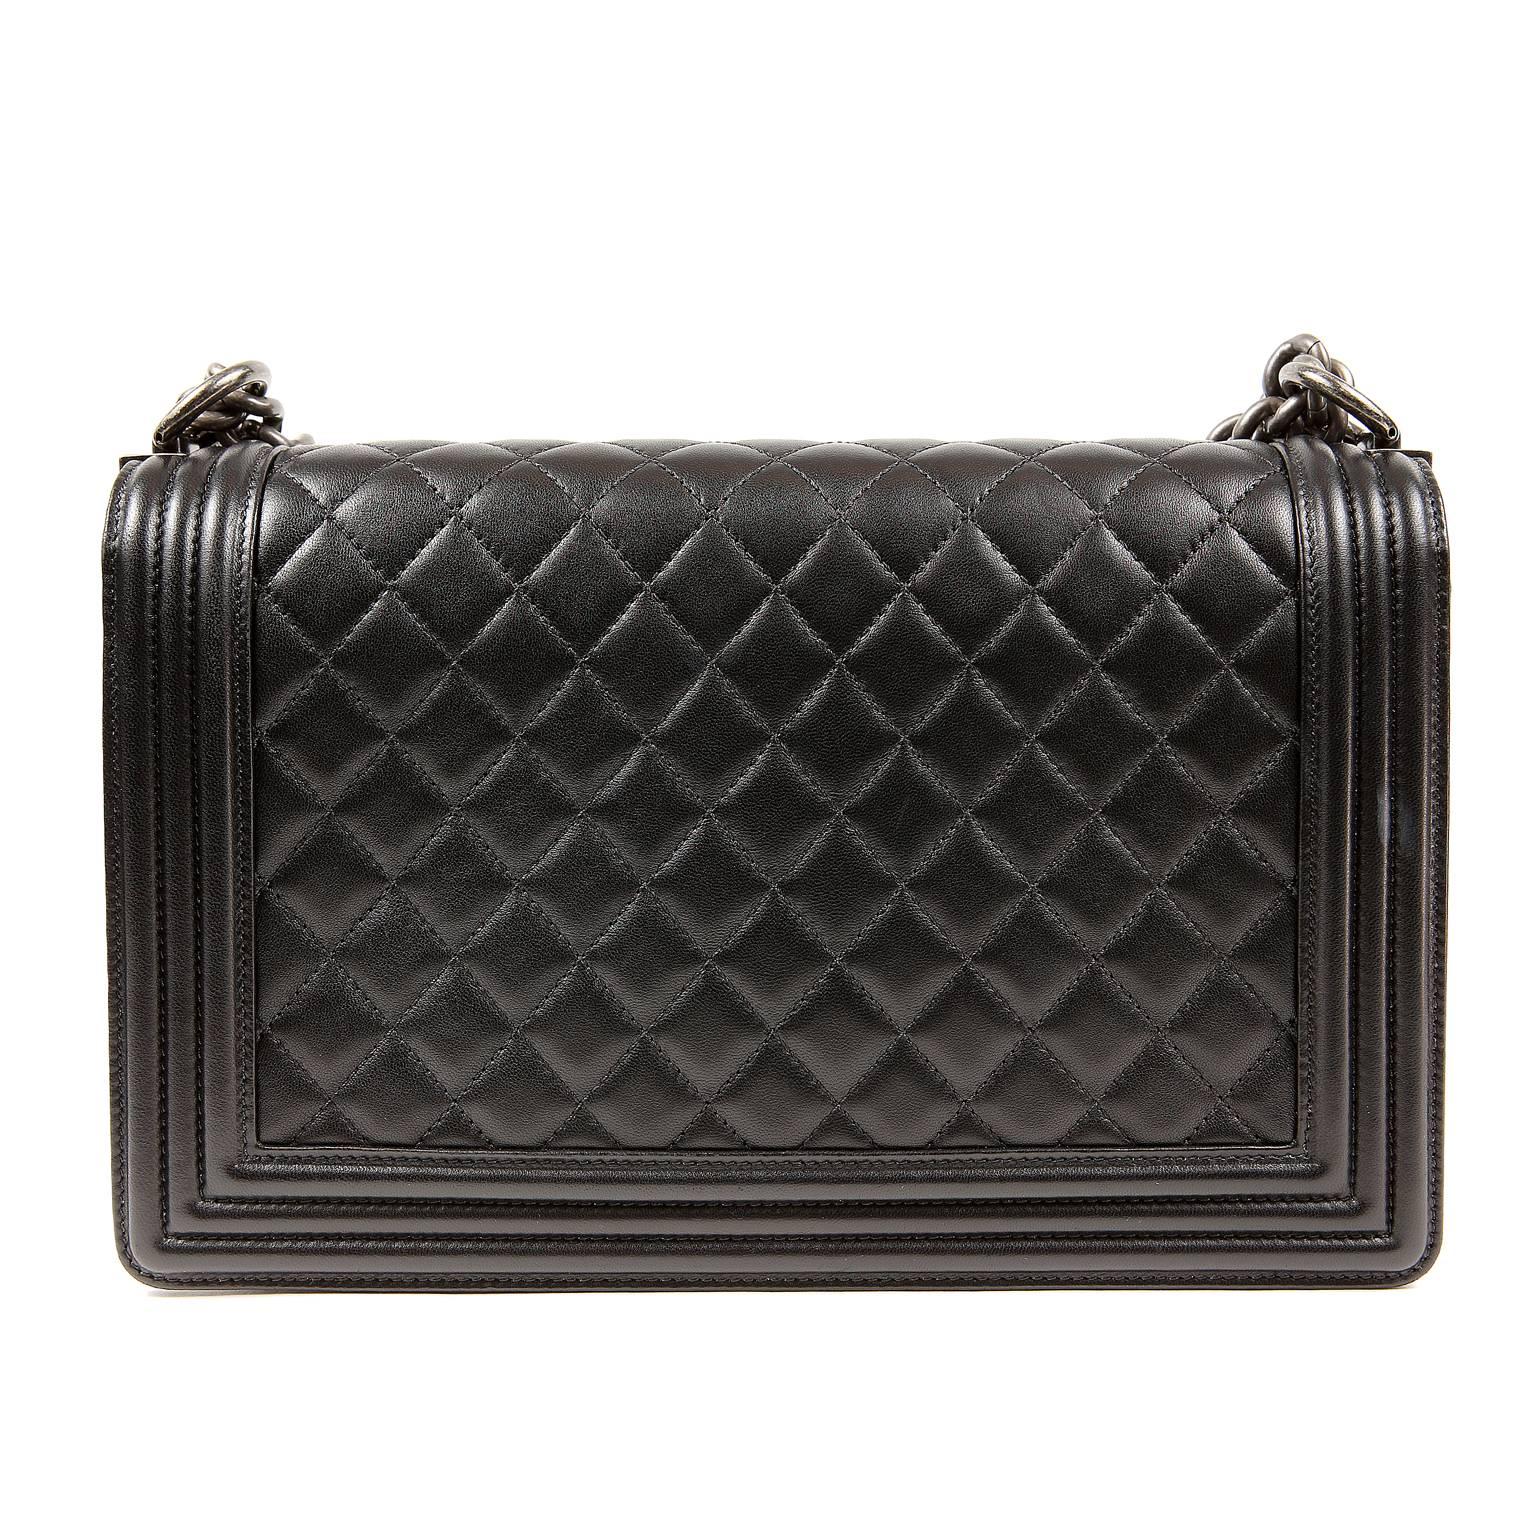 Chanel Black Lambskin Large Boy Bag- PRISTINE
 The updated design is structured and edgy with a versatility that makes it extremely popular.

Black lambskin is quilted in signature Chanel diamond stitched pattern with a welted framed edge.  